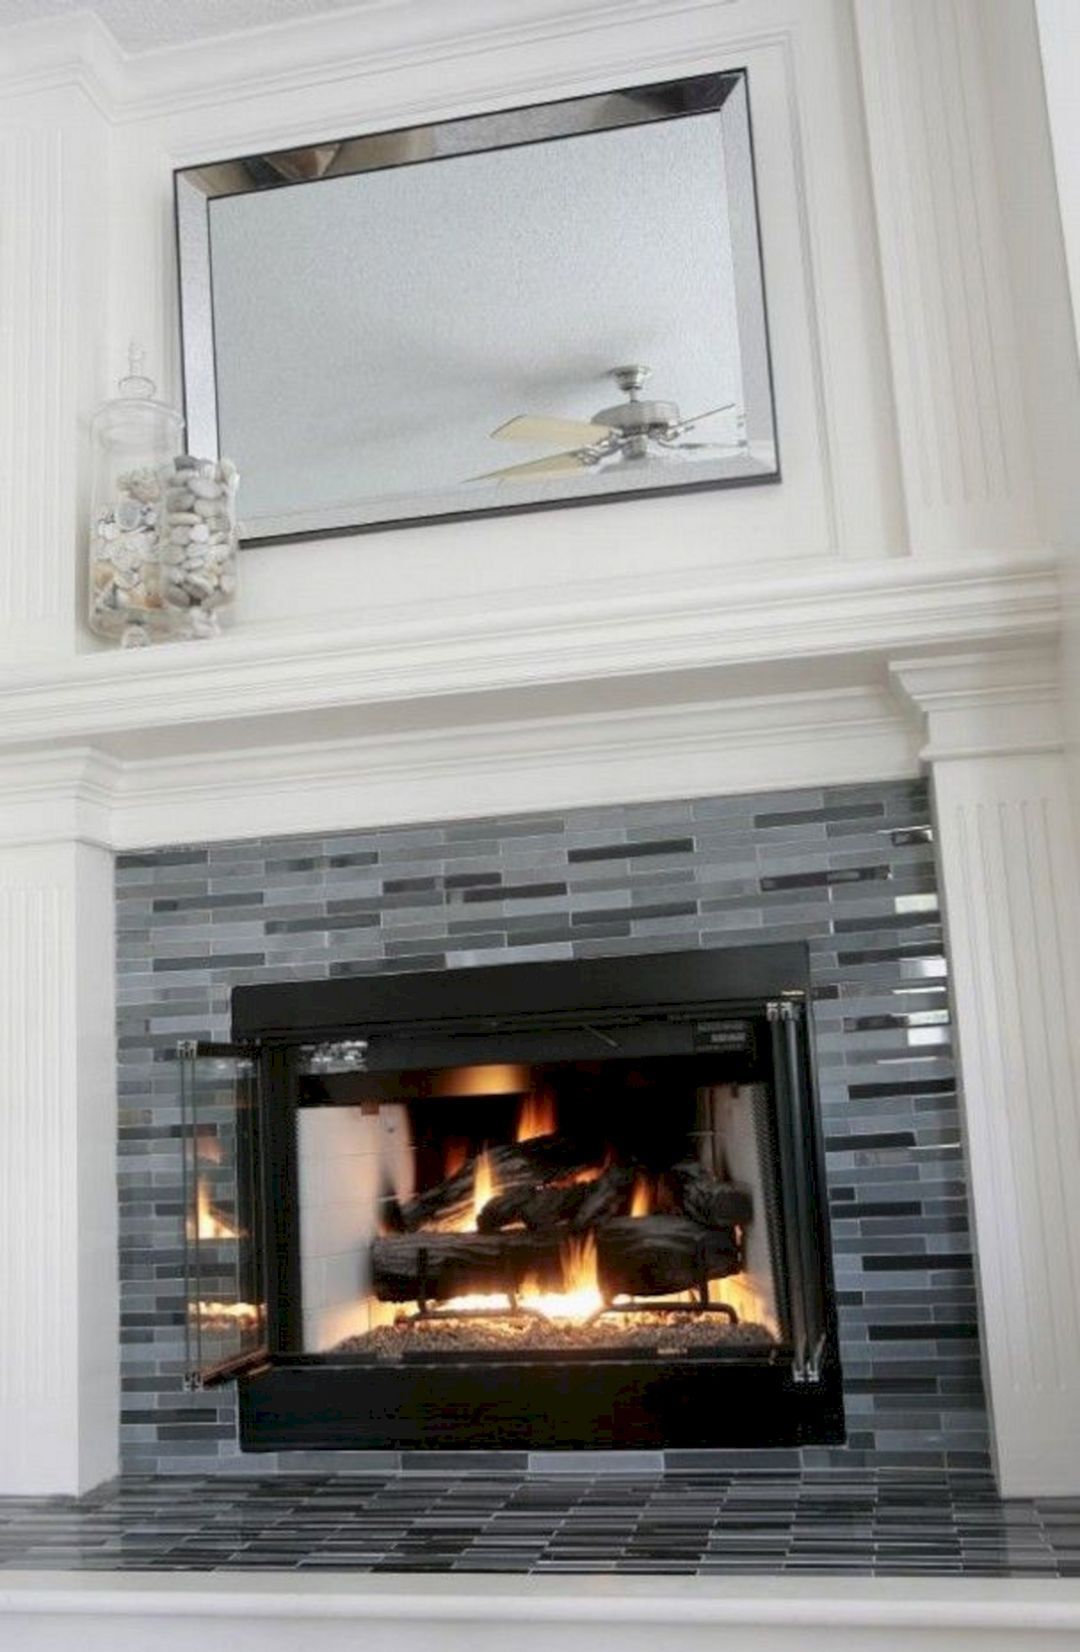 Decorative Gas Fireplace New 22 Wonderful Fireplace Tile Design for Amazing Home